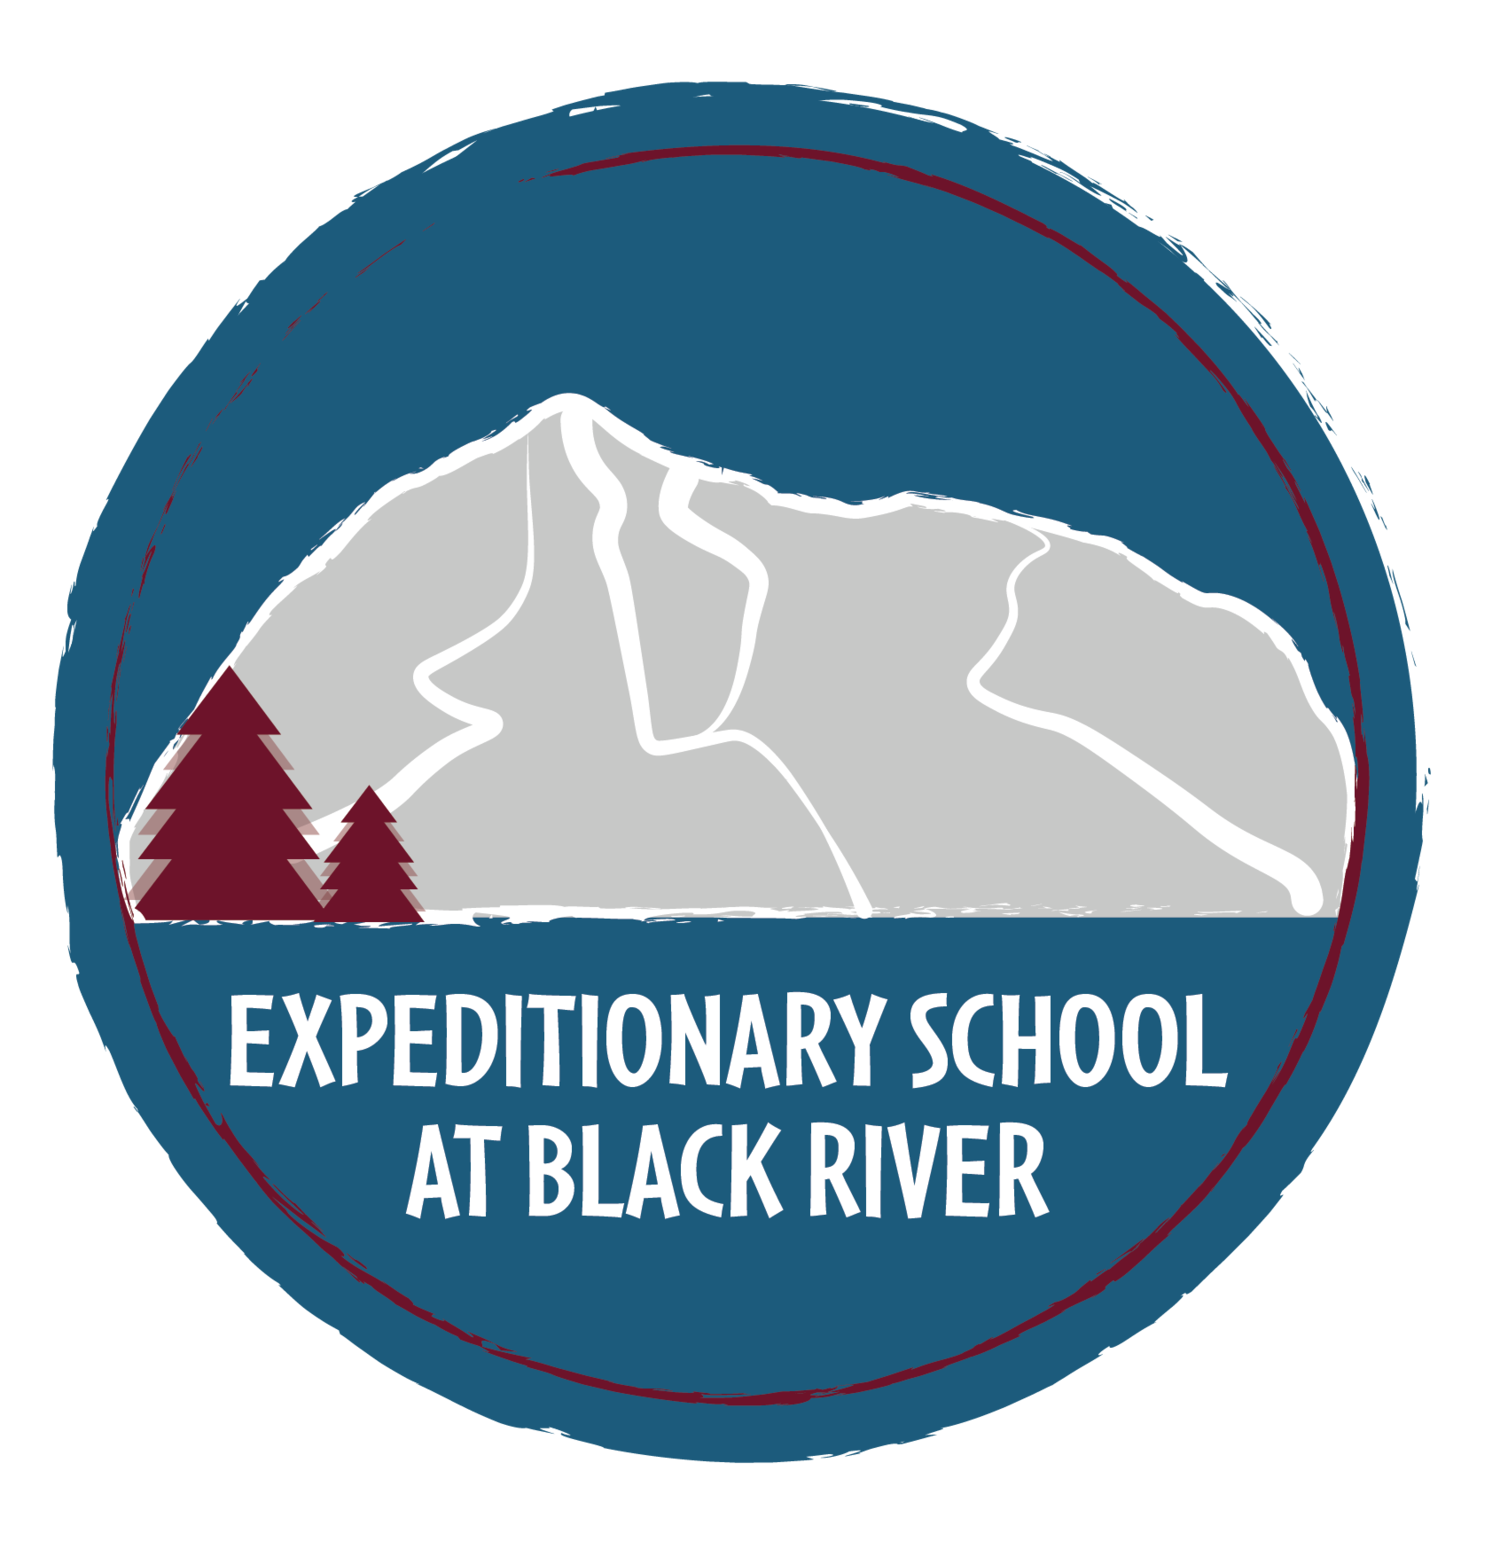 Expeditionary School at Black River